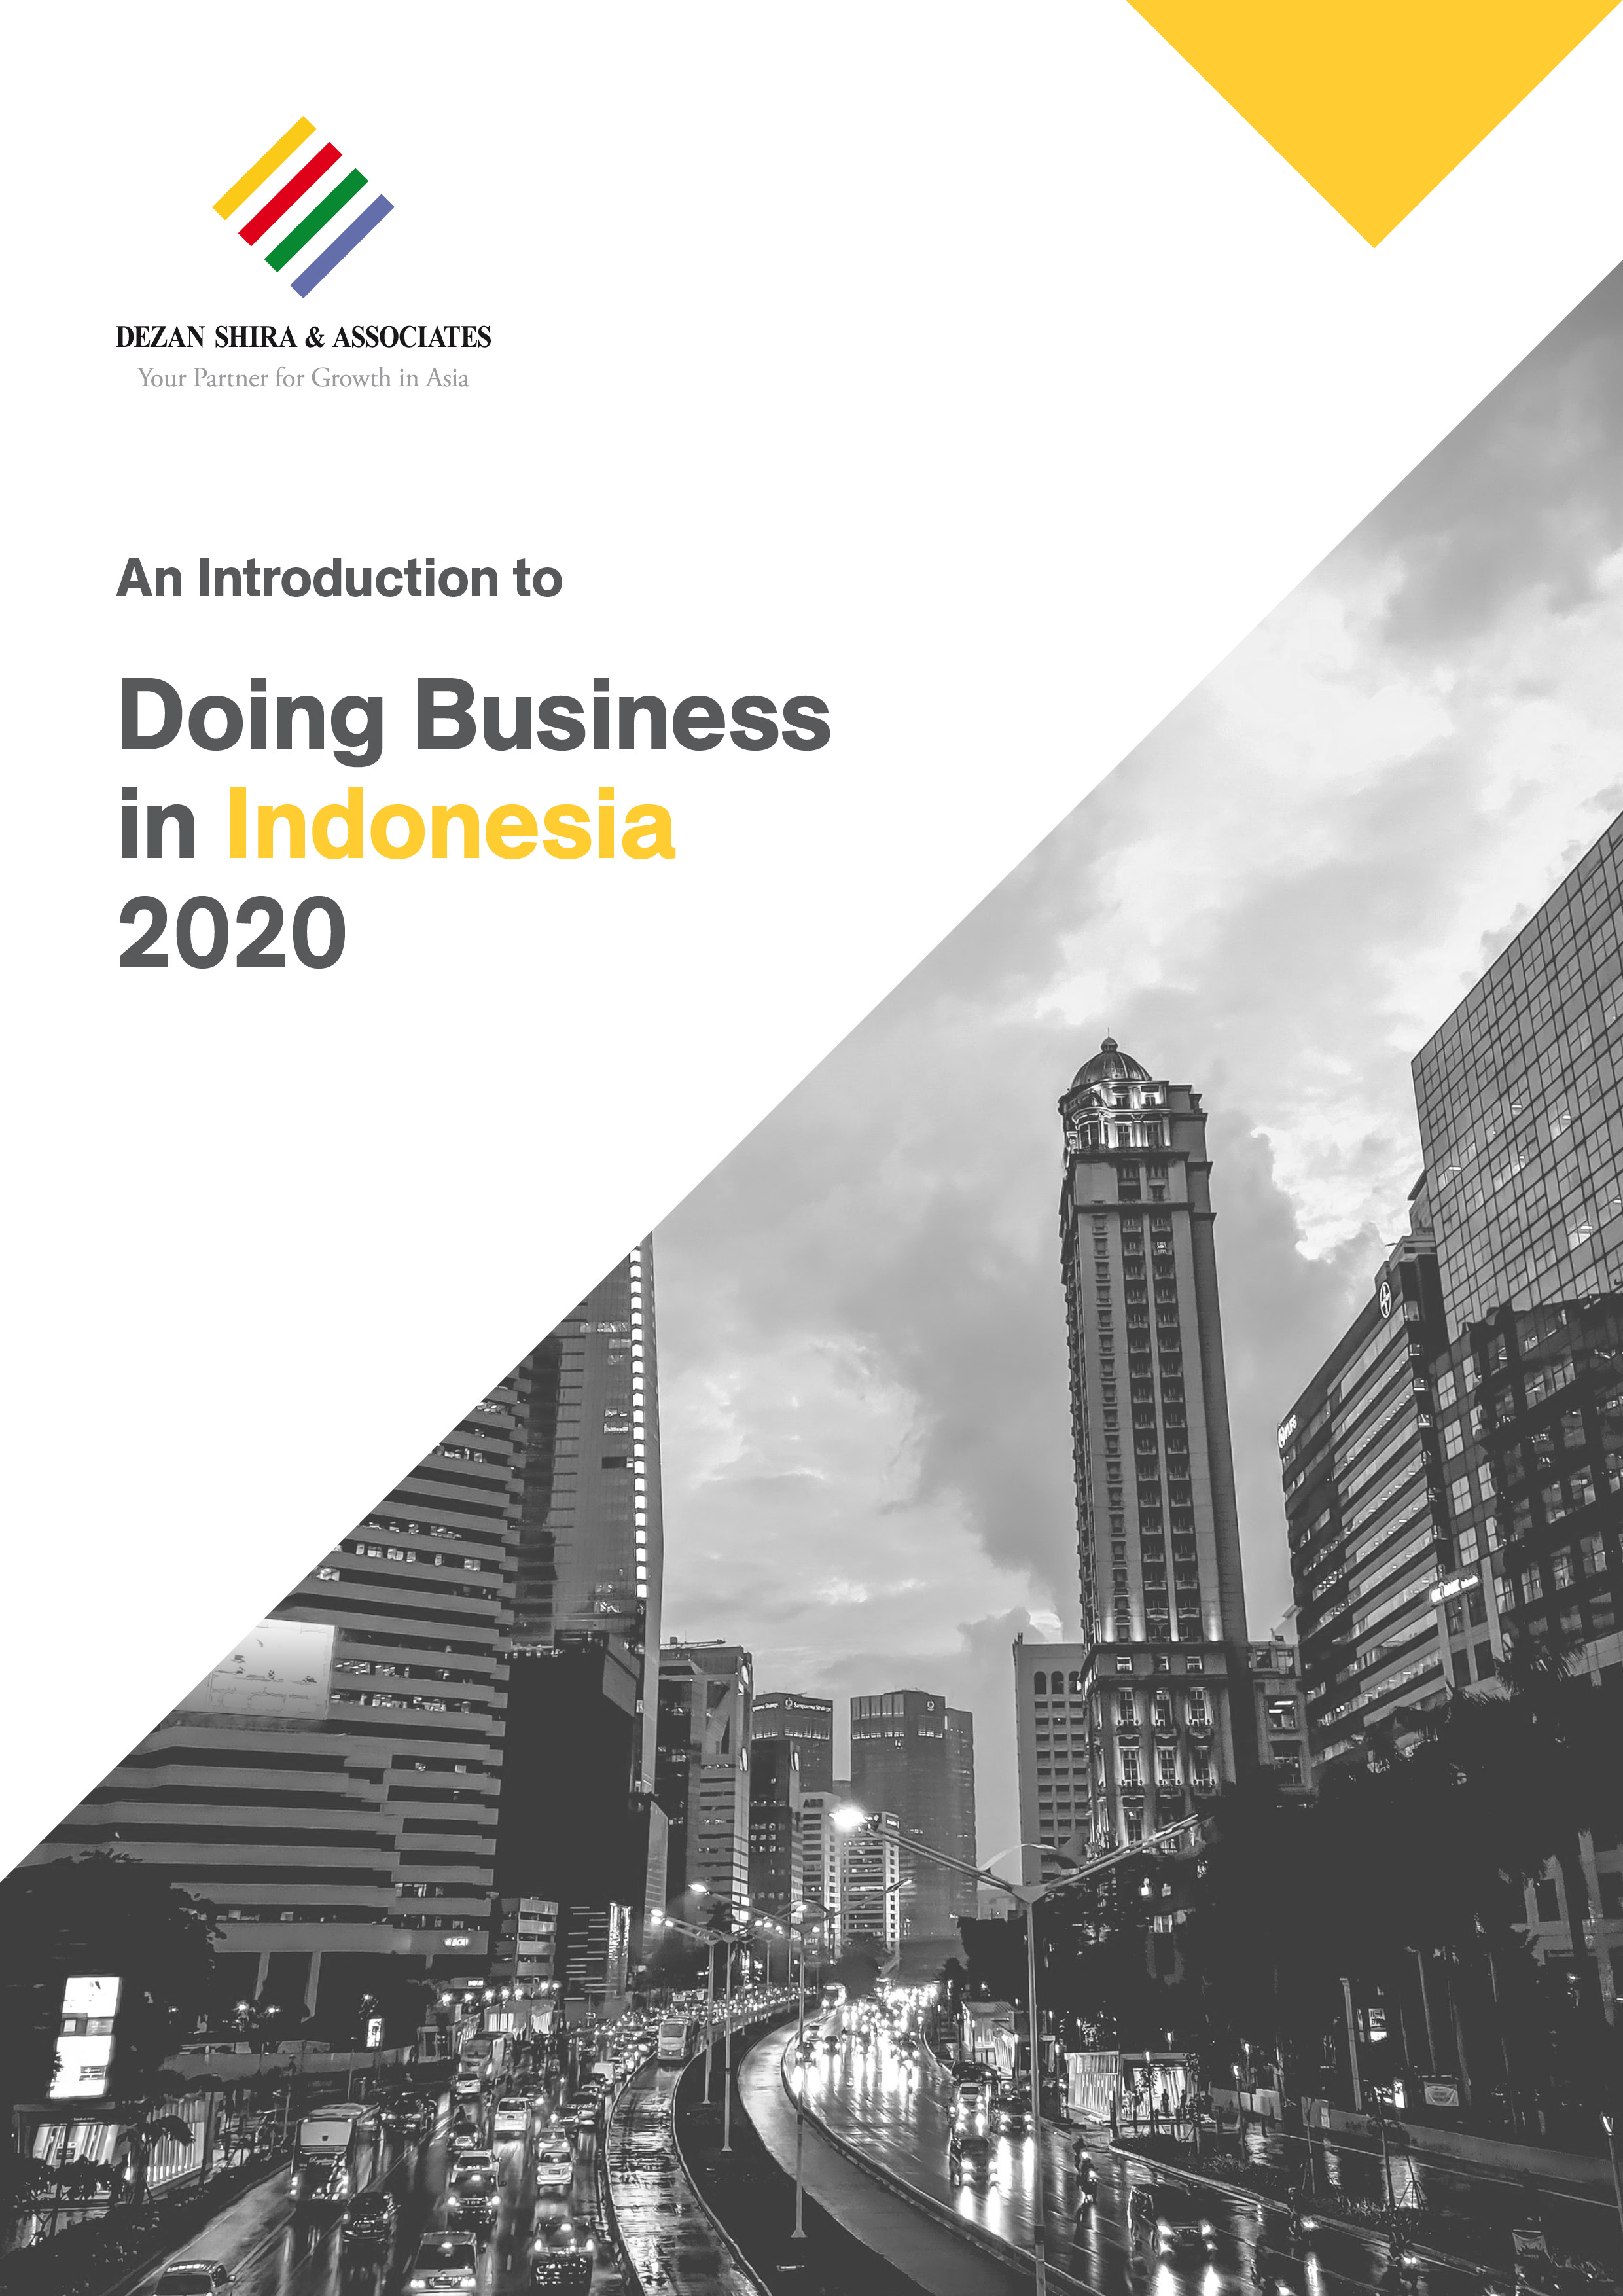 Business, Legal, Tax, Accounting, HR, Payroll News | Indonesia Briefing